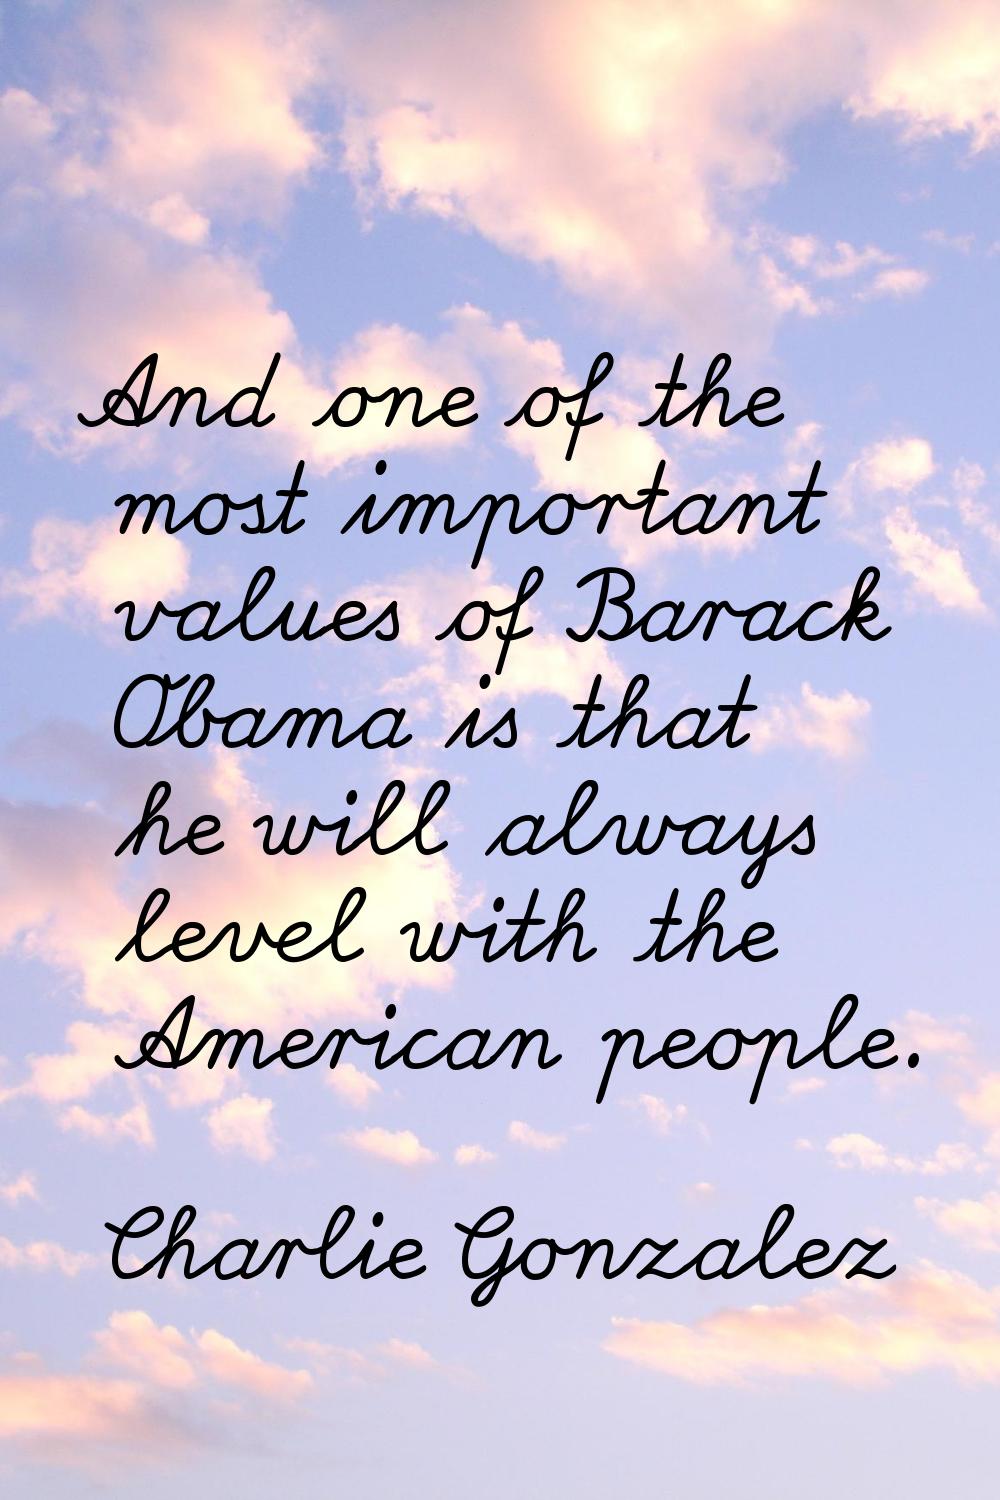 And one of the most important values of Barack Obama is that he will always level with the American